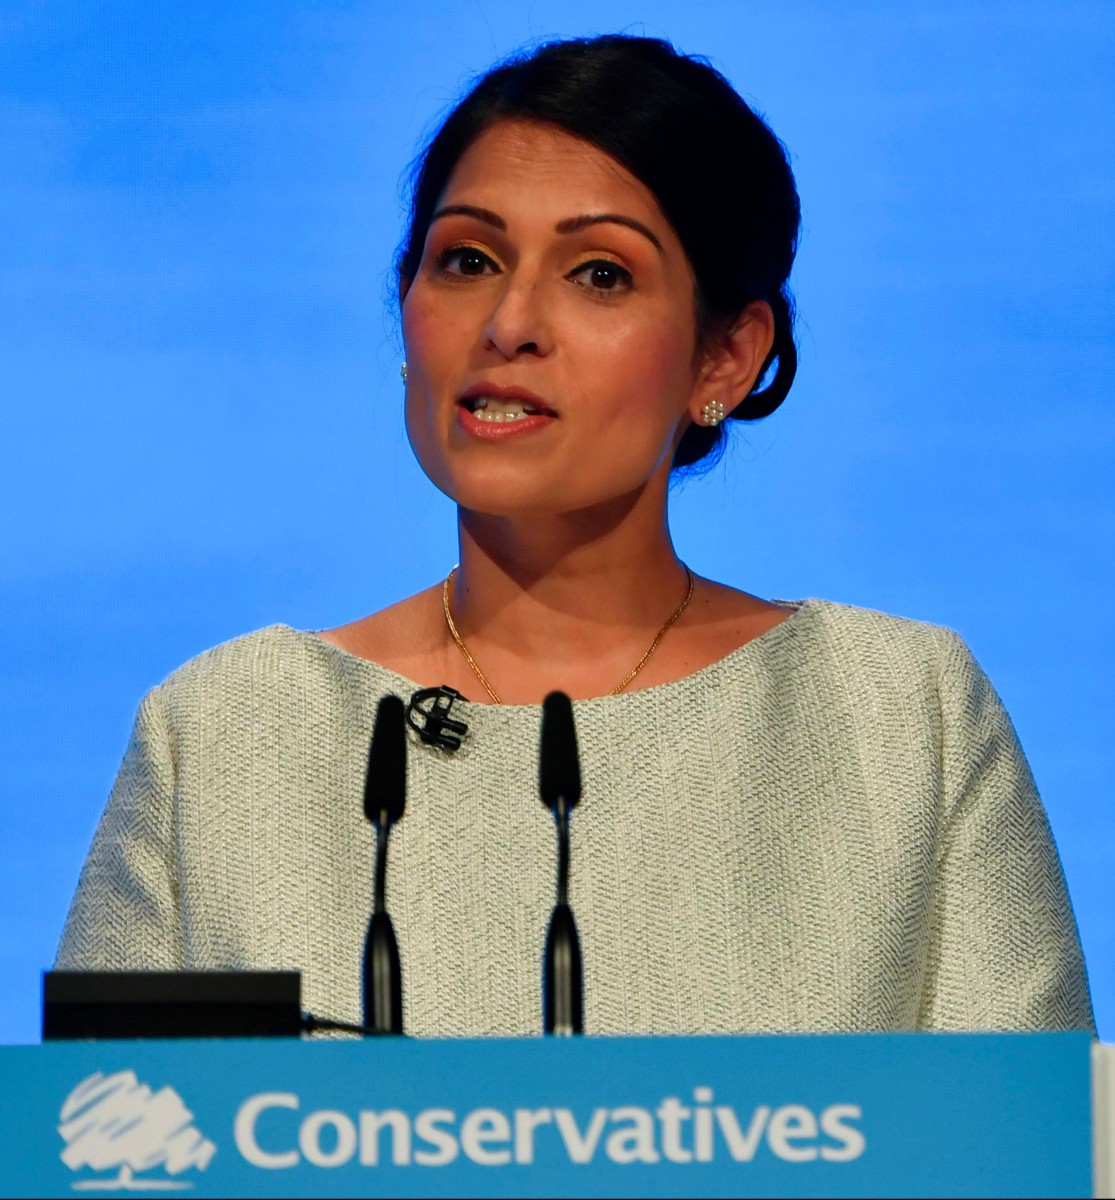 Priti Patel has said the proposed immigration system will allow Britain to control number while remaining open to vital professions like nurses